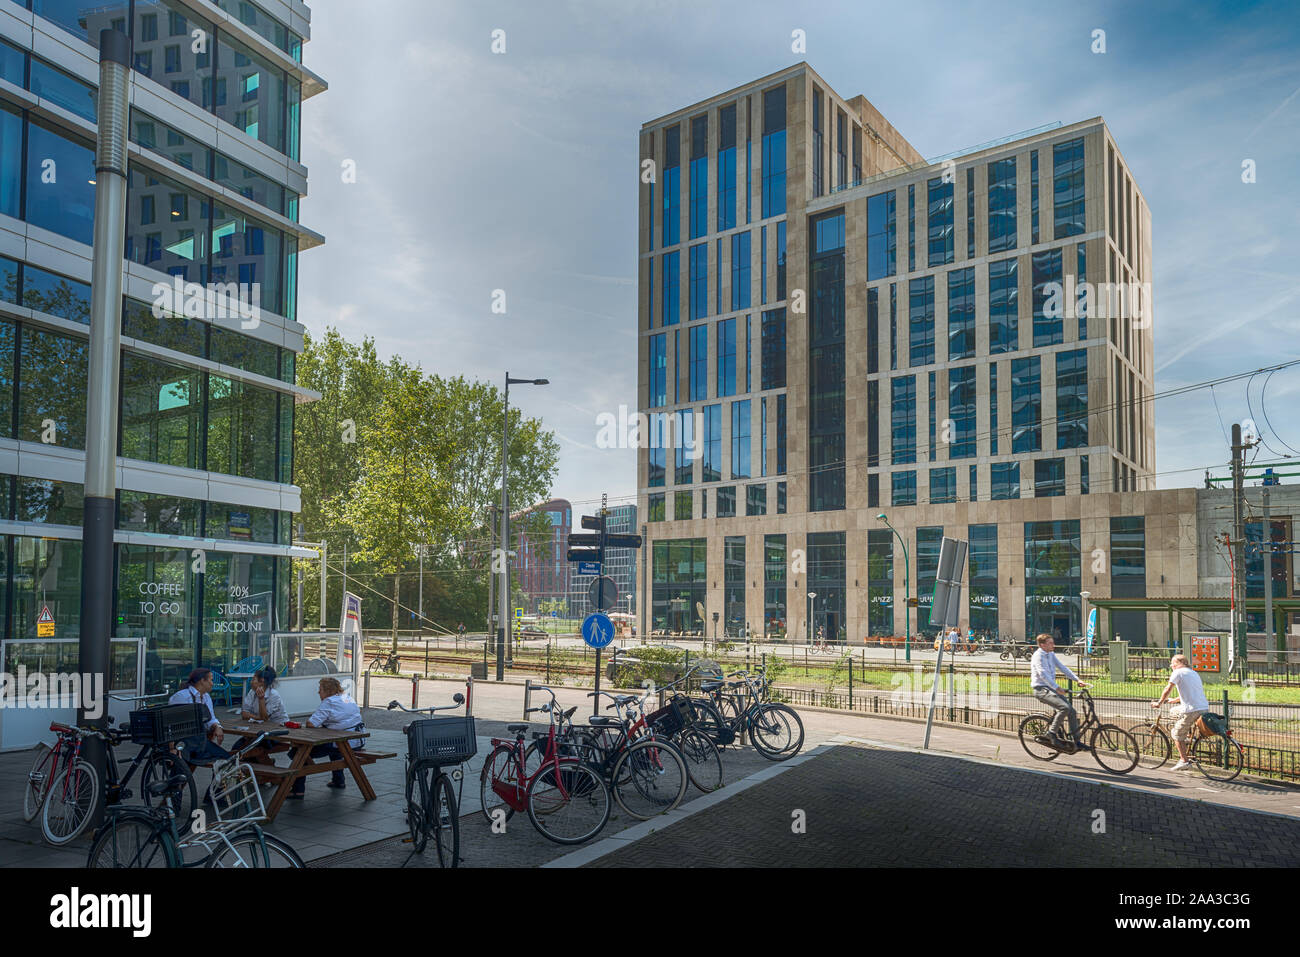 Amsterdam, Claude Debussylaan, the Netherlands, 08/23/2019, Street in the Amsterdam Zuidas (South axis) business district, modern office buildings Stock Photo